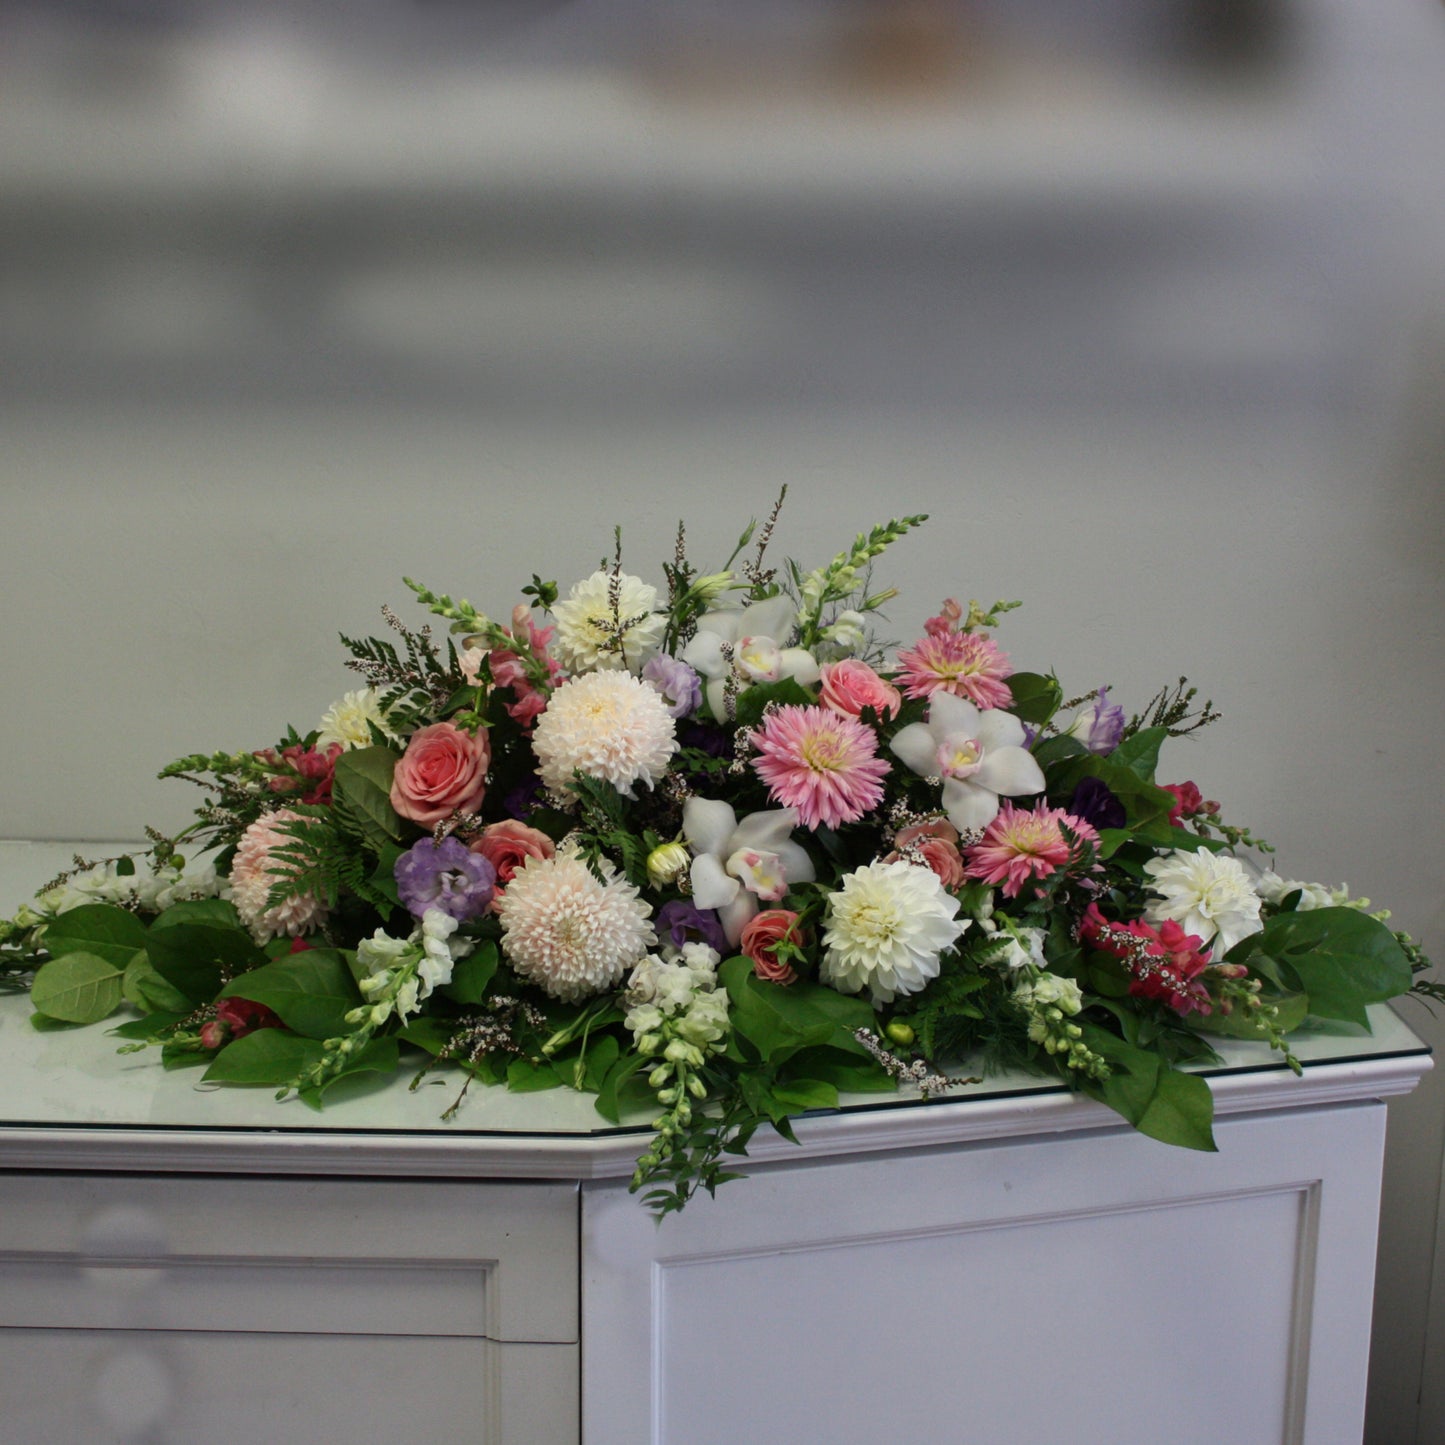 casket spray oleander floral design toronto same day flower delivery sympathy funeral etobicoke white and green flowers orchid rose eucalyptus dahlia delphinium snapdragons